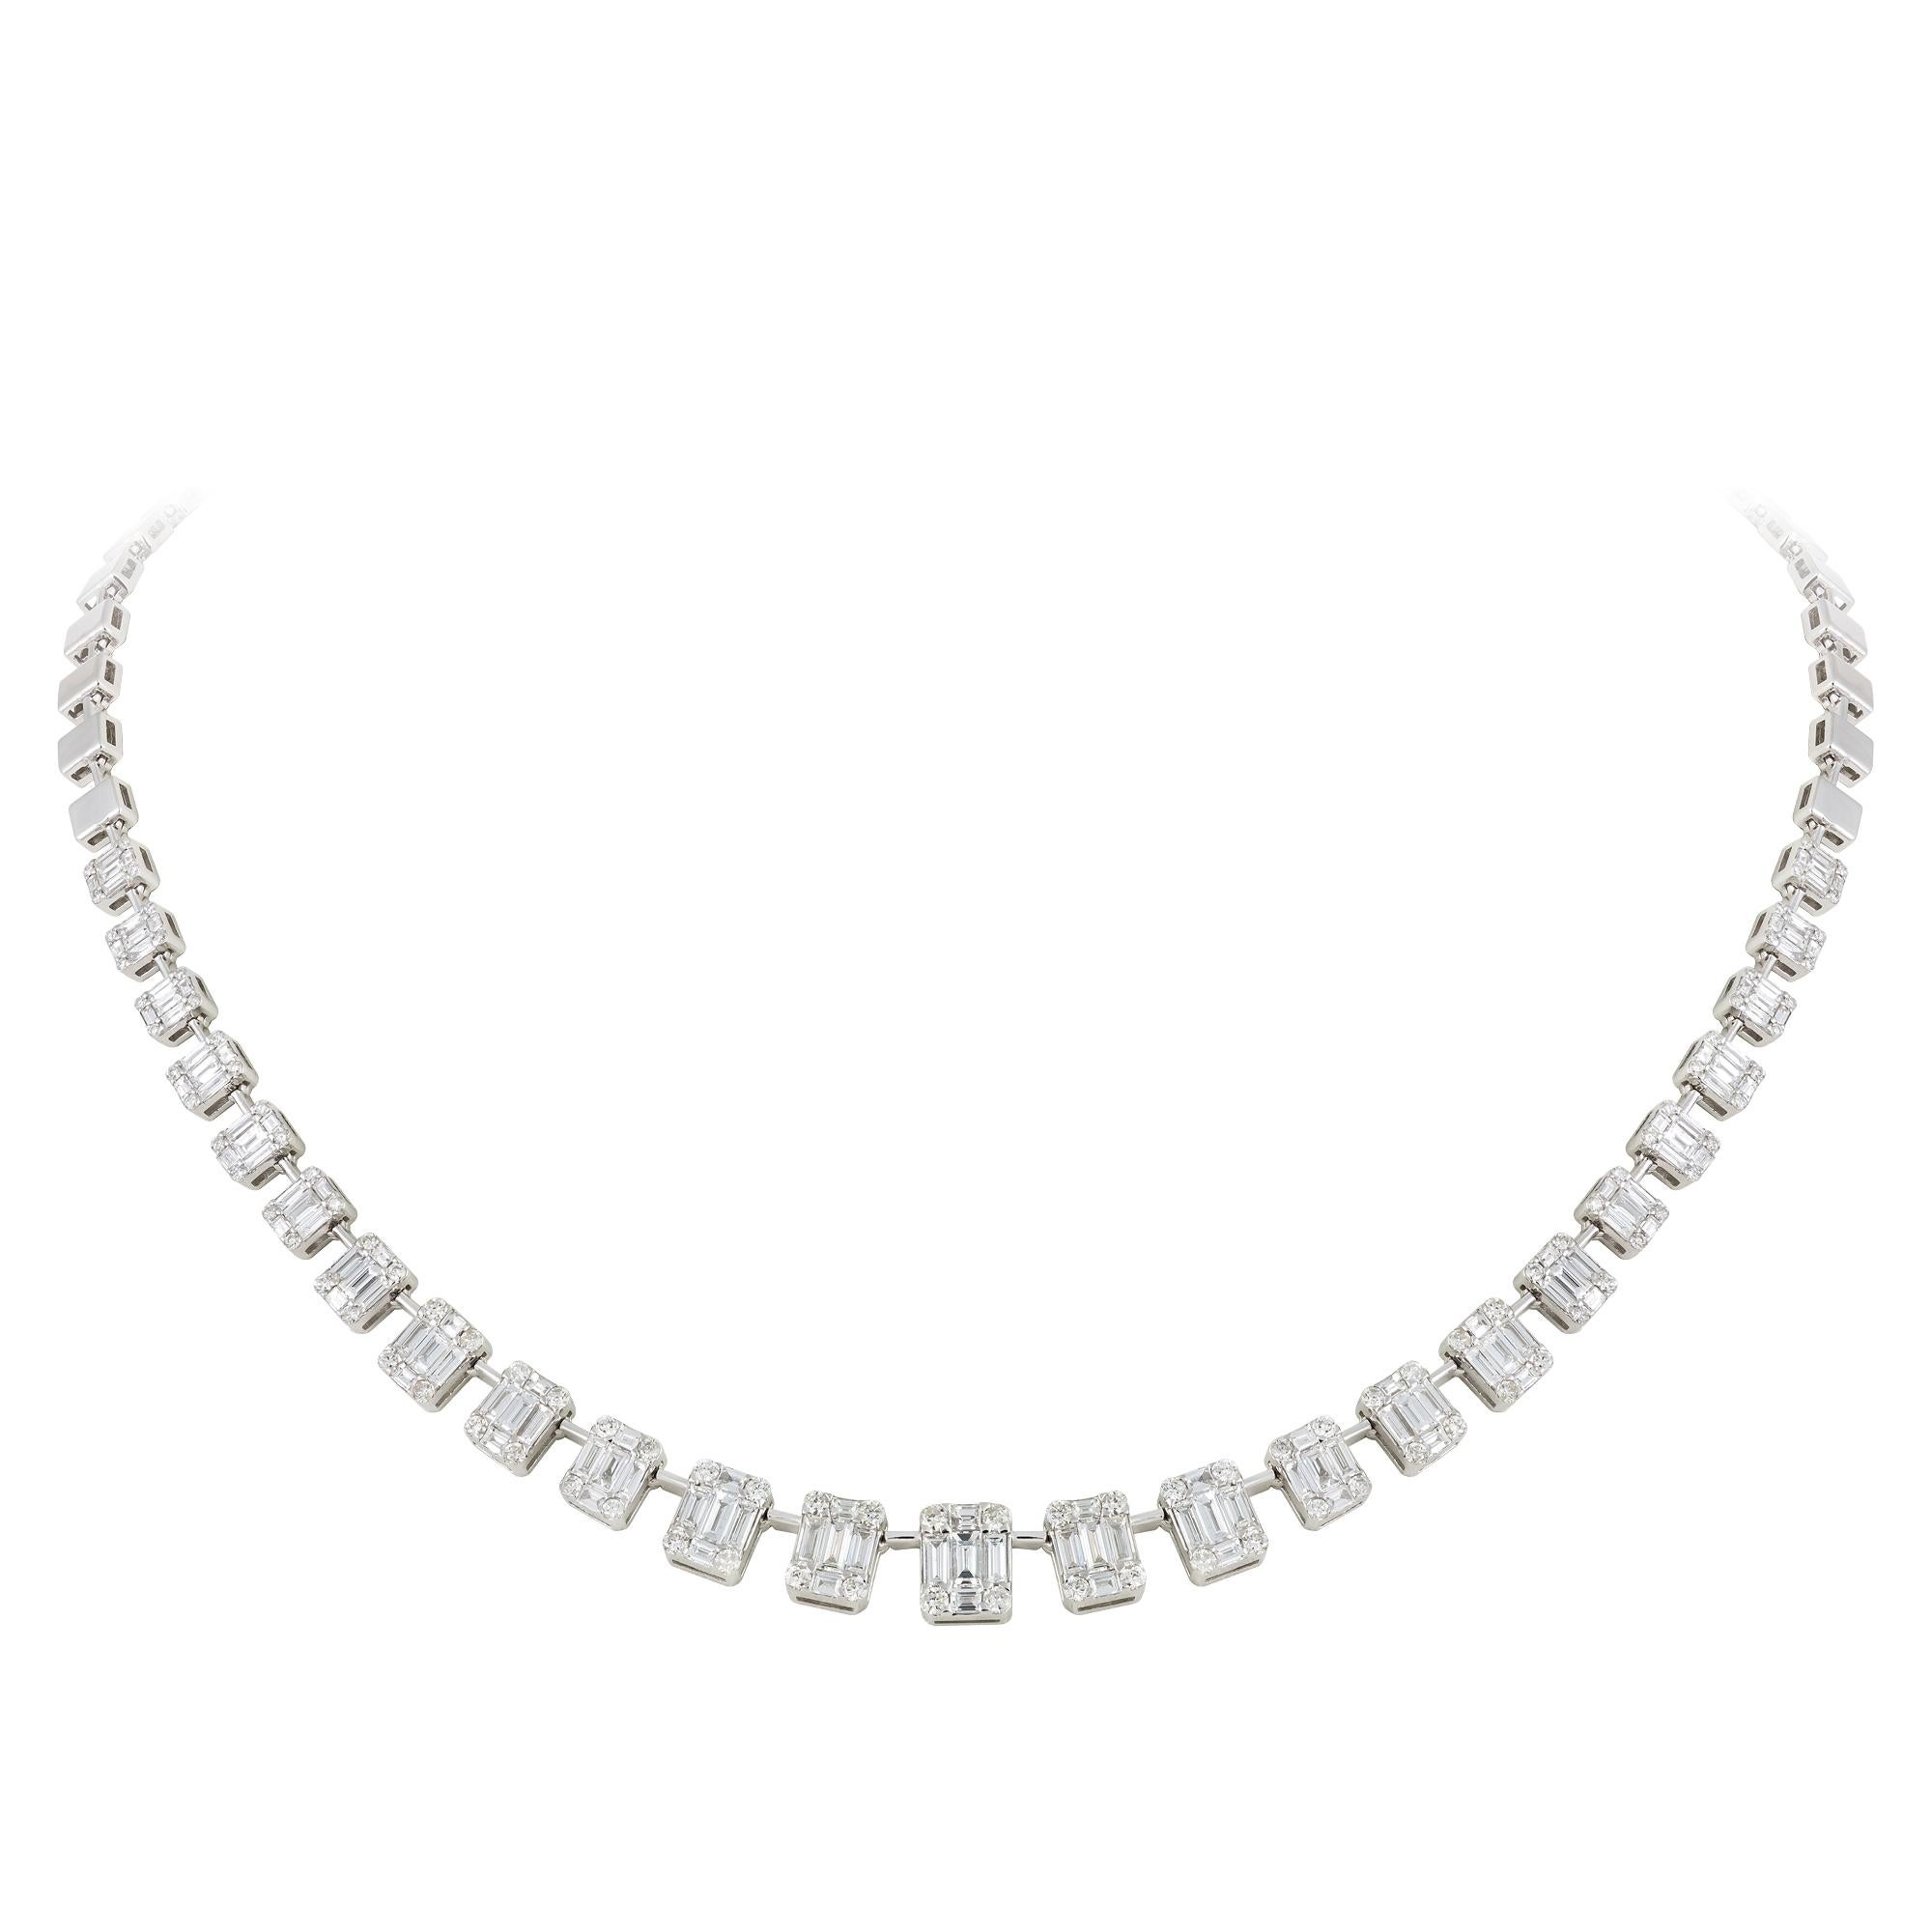 NECKLACE 18K White Gold Diamond 1.37 Cts/100 Pcs Tapered Baguette 4.59 Cts/125 Pcs
